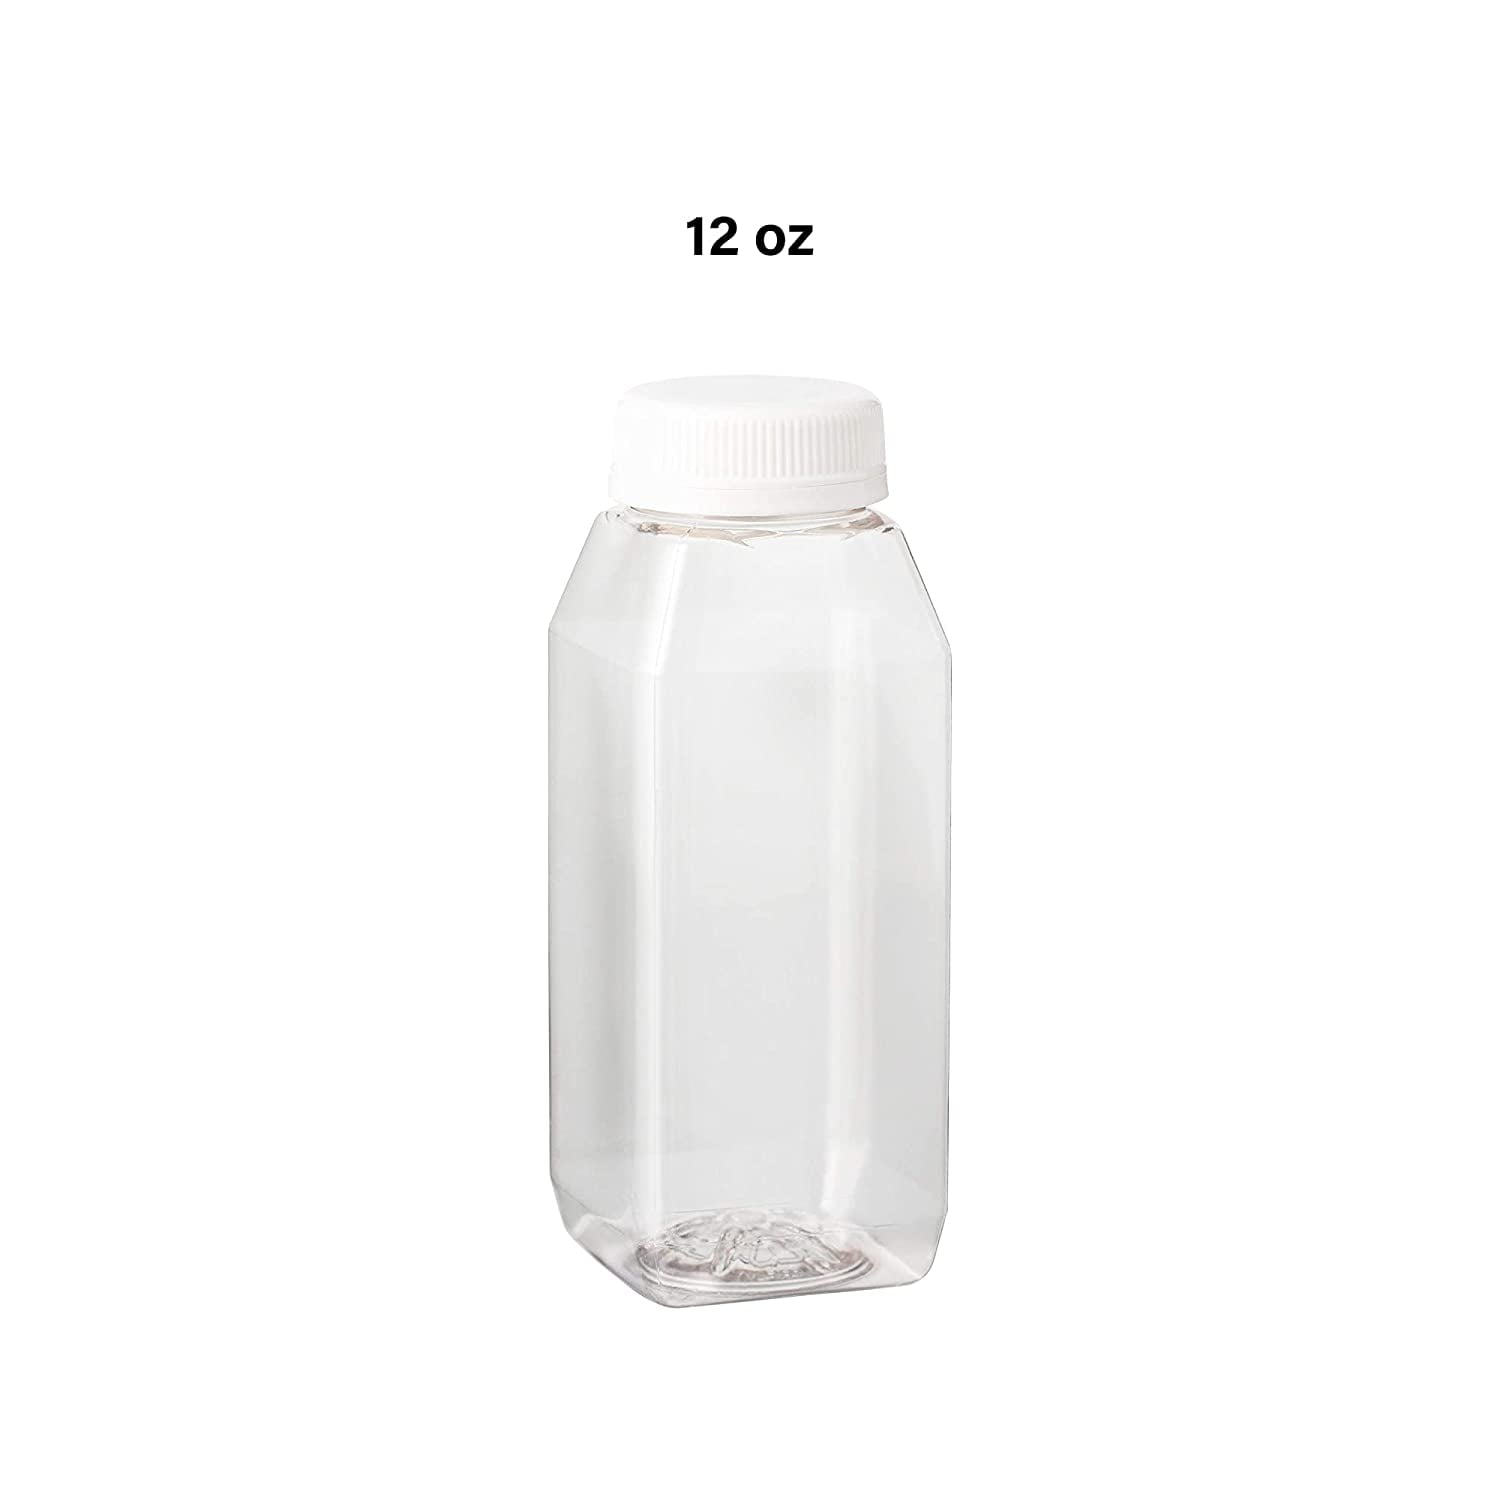 12 oz Juice Bottles with Caps for Juicing (35 pack) - Reusable Clear Empty  Plastic Bottles - 12 Oz D…See more 12 oz Juice Bottles with Caps for